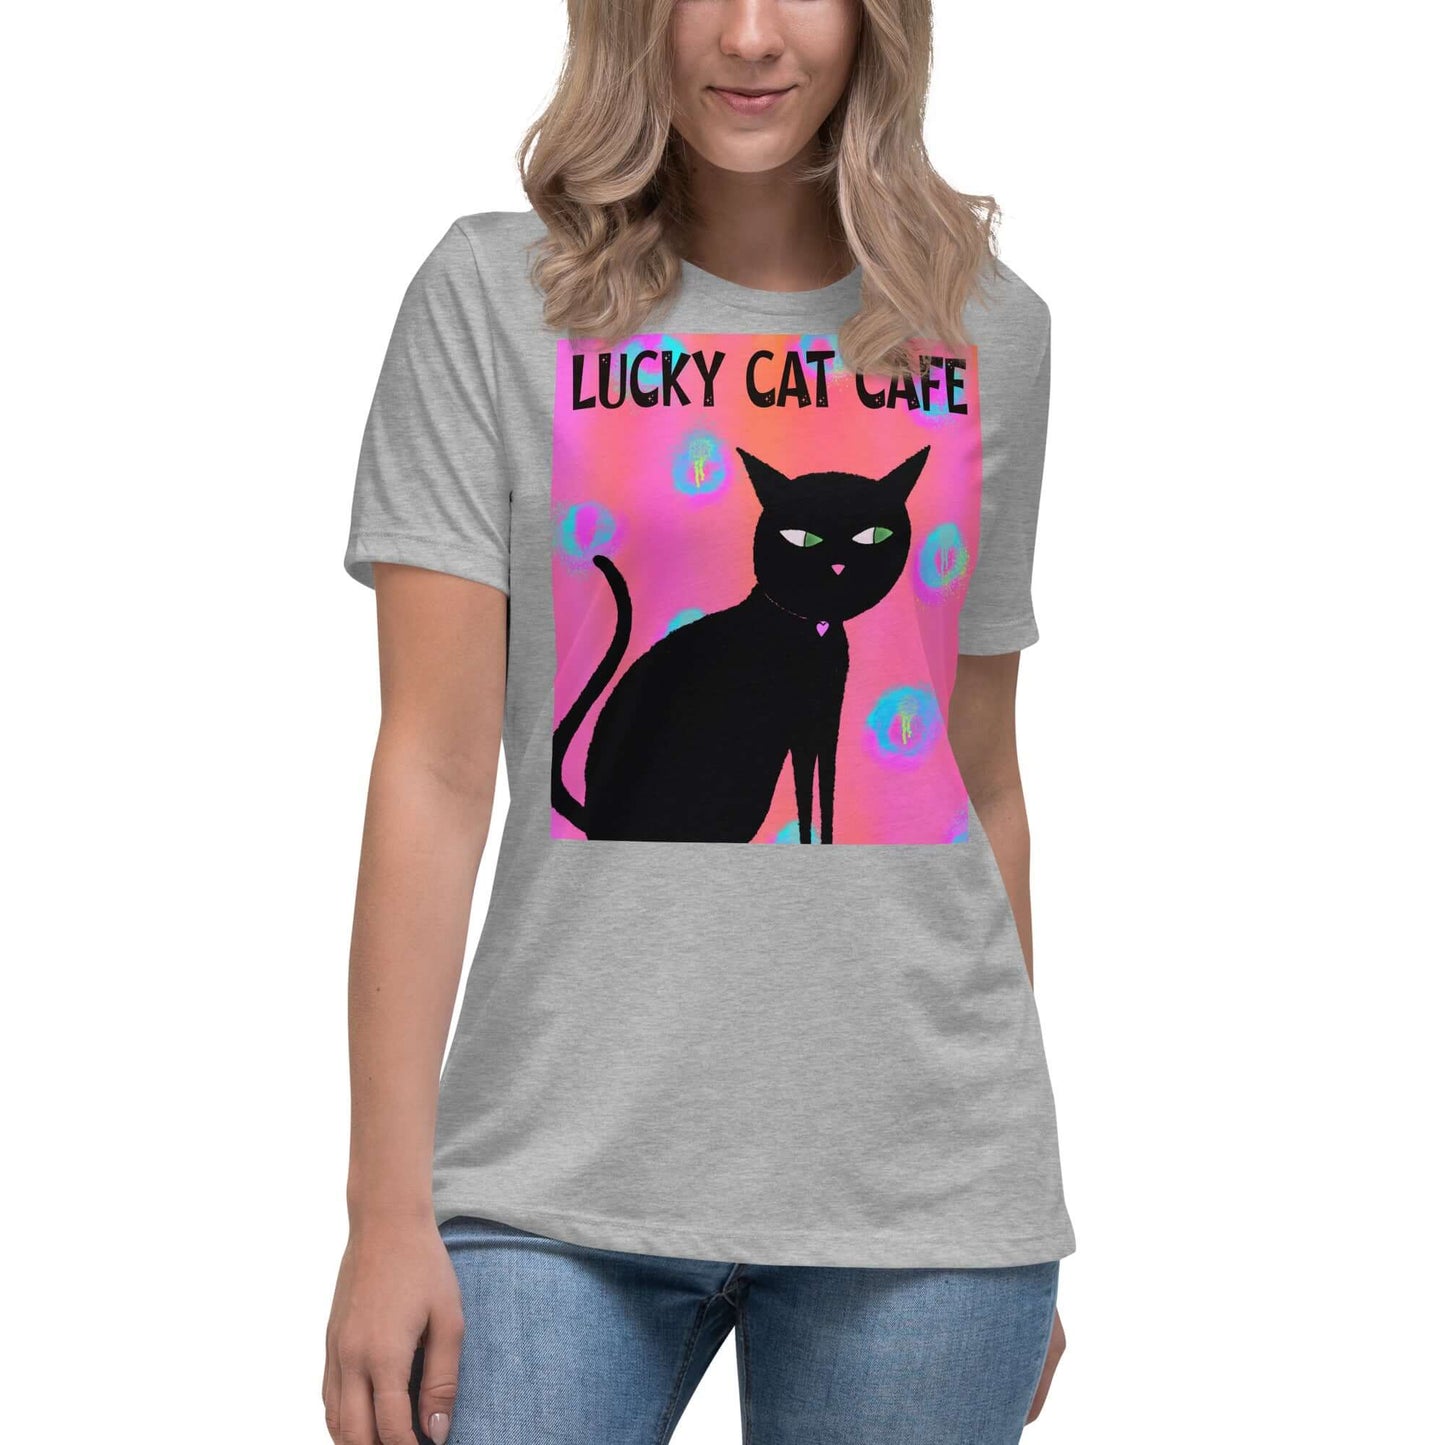 Black Cat on Hot Pink Tie Dye Background with Text “Lucky Cat Cafe” Women’s Short Sleeve Tee in Athletic Heather Gray